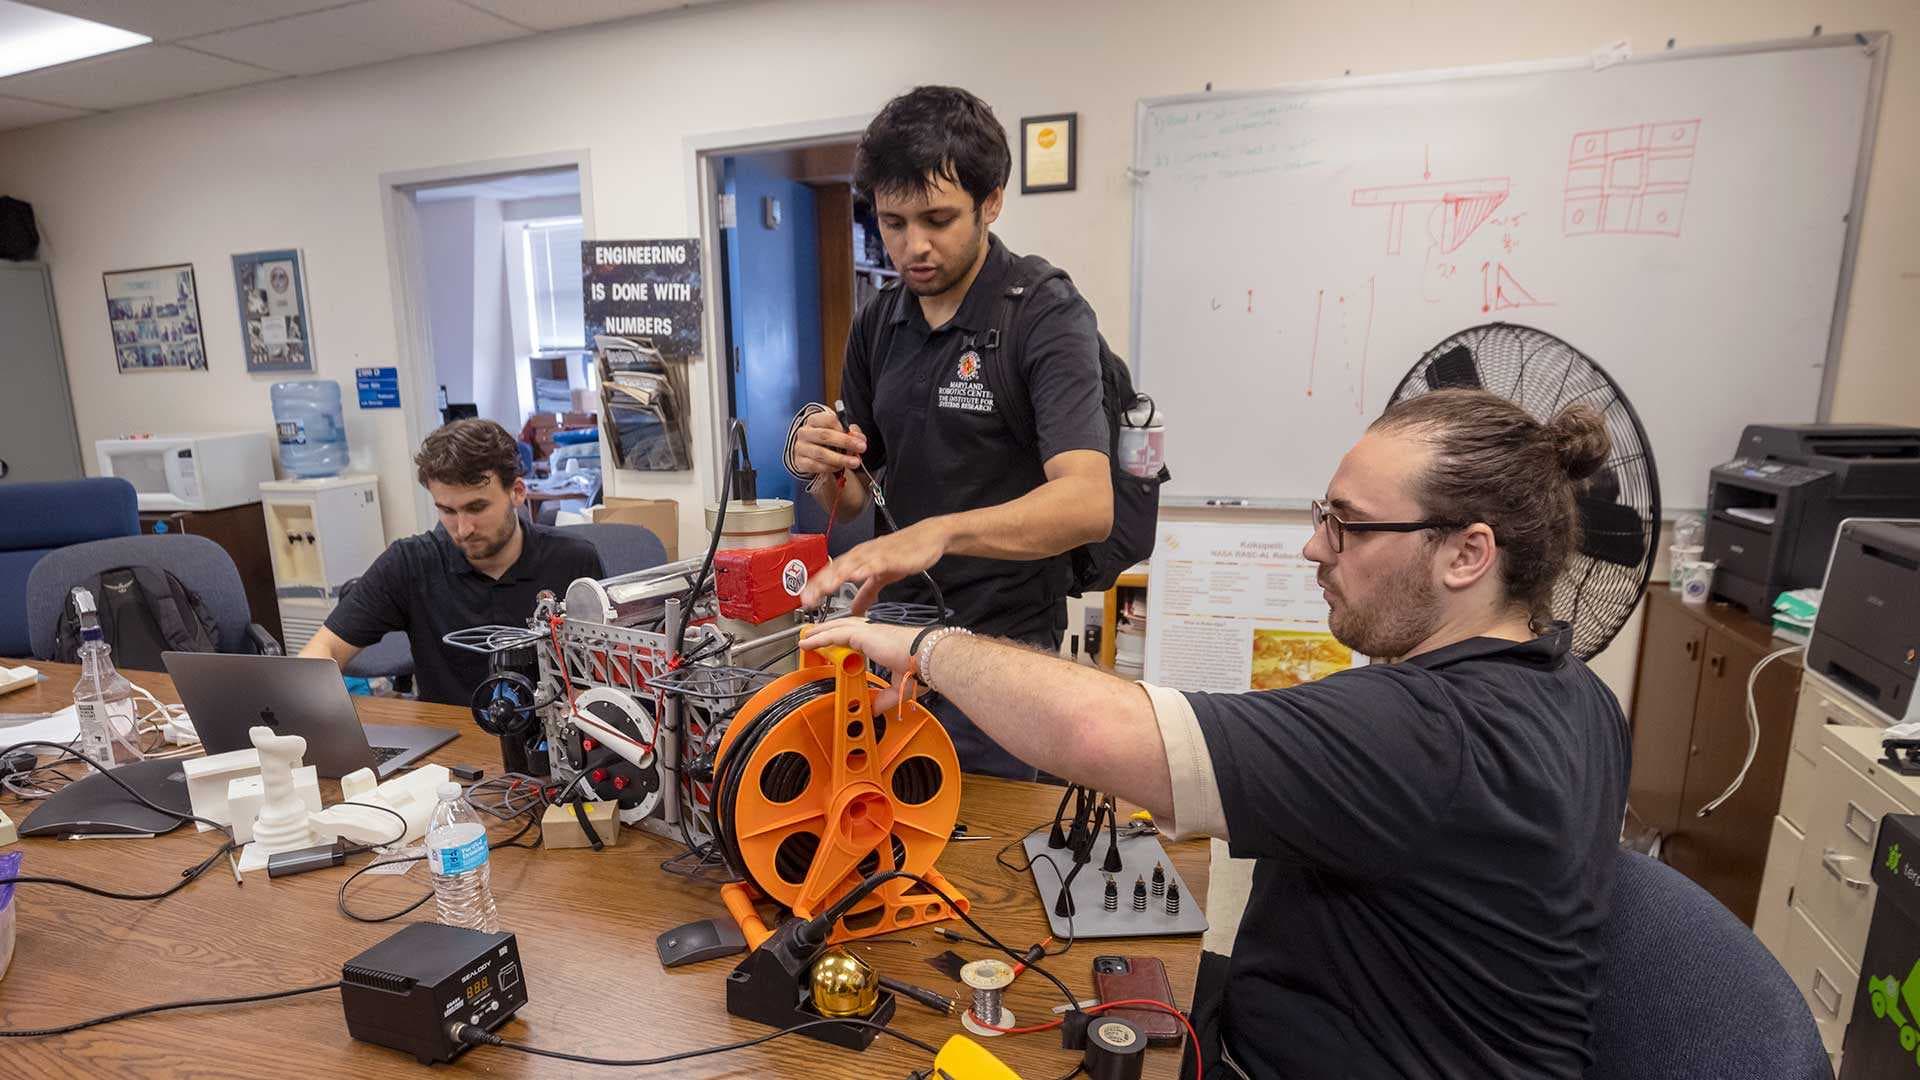 Students work on a robot